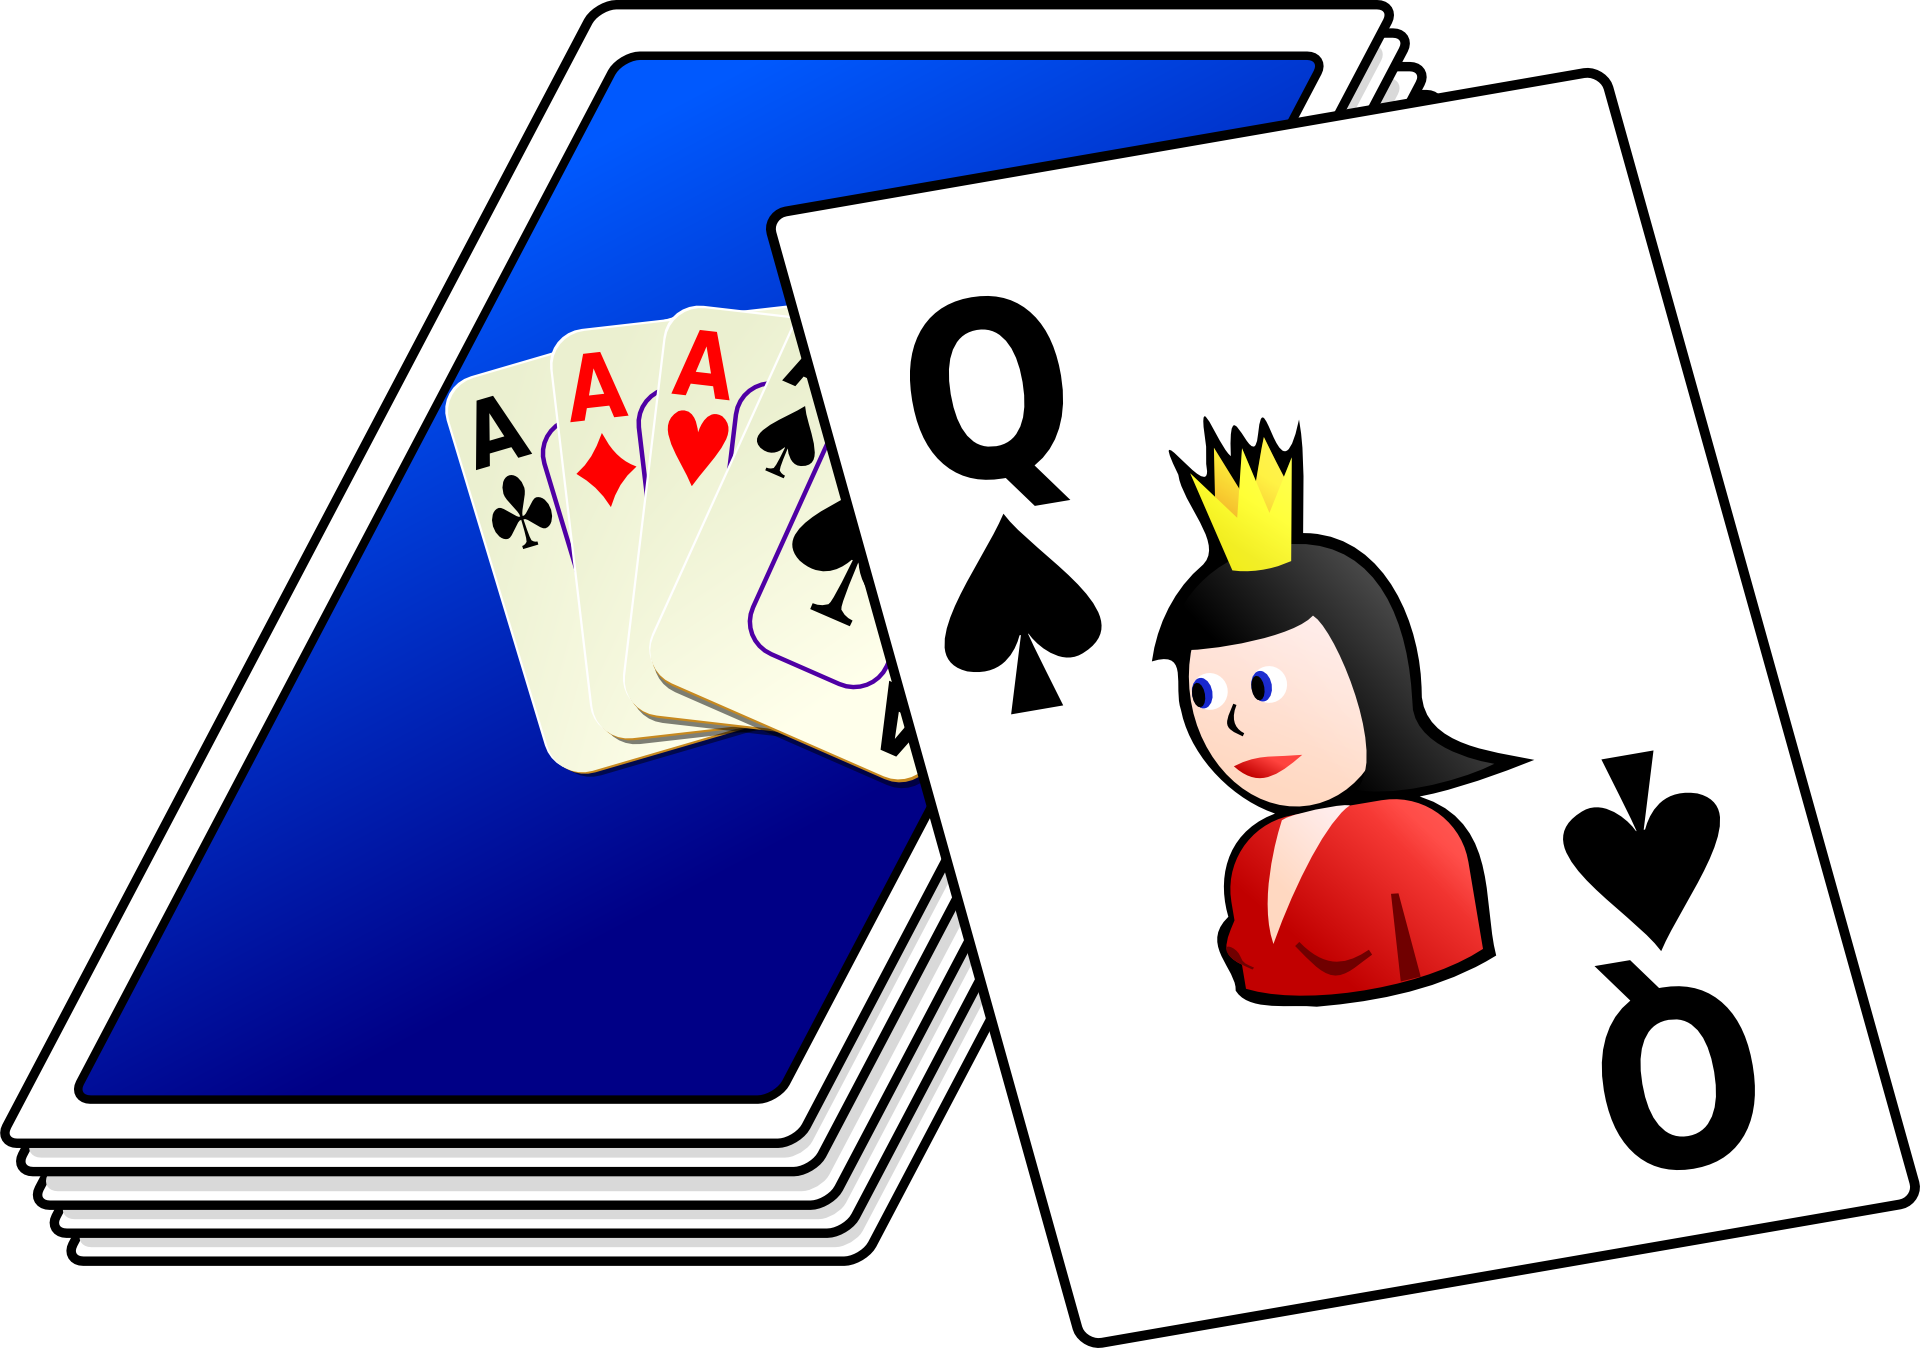 6 Interesting Facts About Solitaire That You Never Knew